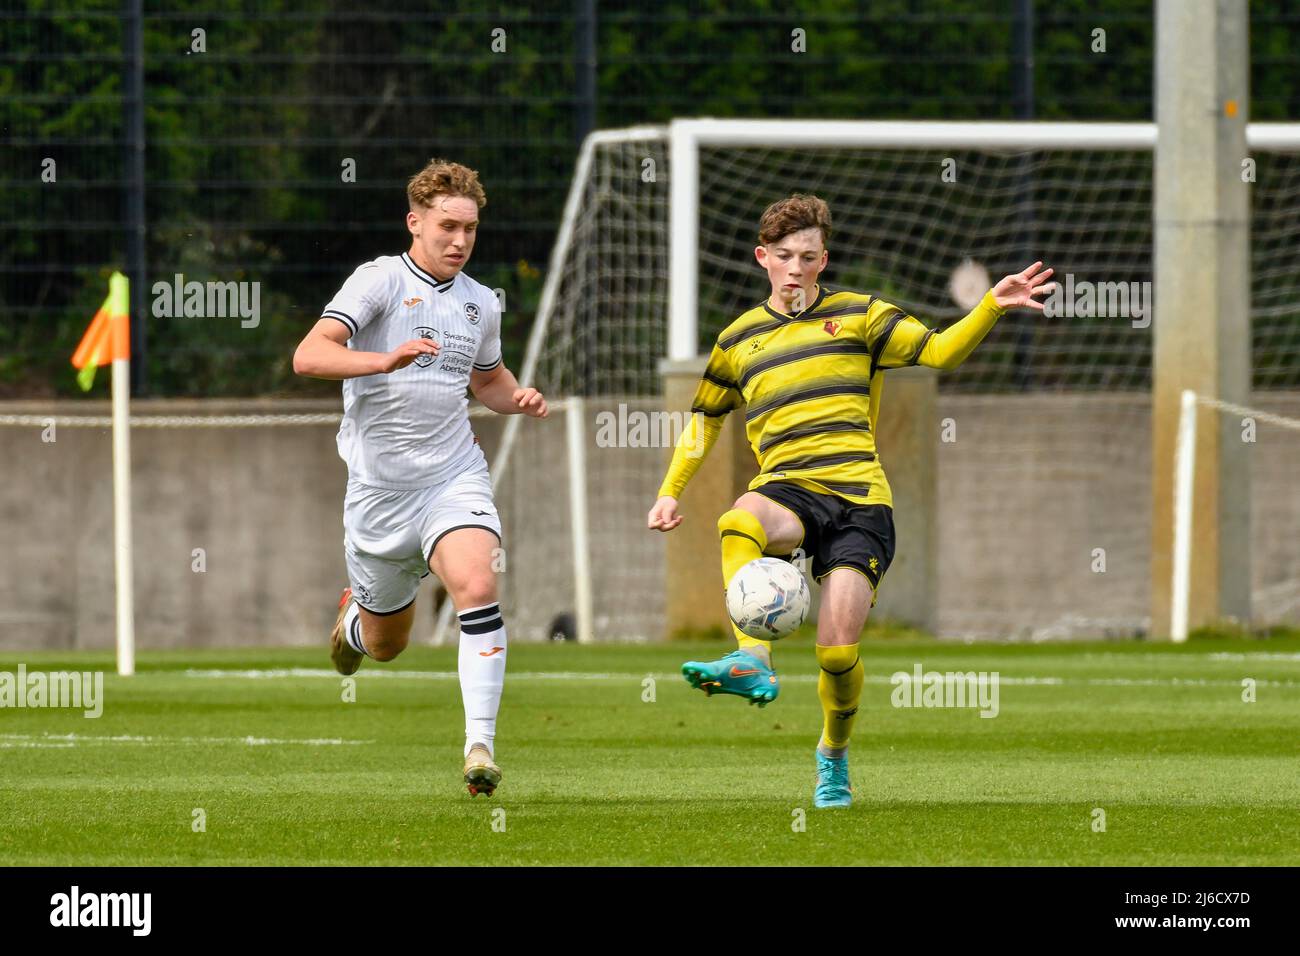 Swansea, Wales. 30 April 2022. Charlie Davis of Watford Under 18s kicks the ball clear during the Professional Development League game between Swansea City Under 18 and Watford Under 18 at the Swansea City Academy in Swansea, Wales, UK on 30 April 2022. Credit: Duncan Thomas/Majestic Media/Alamy Live News. Stock Photo